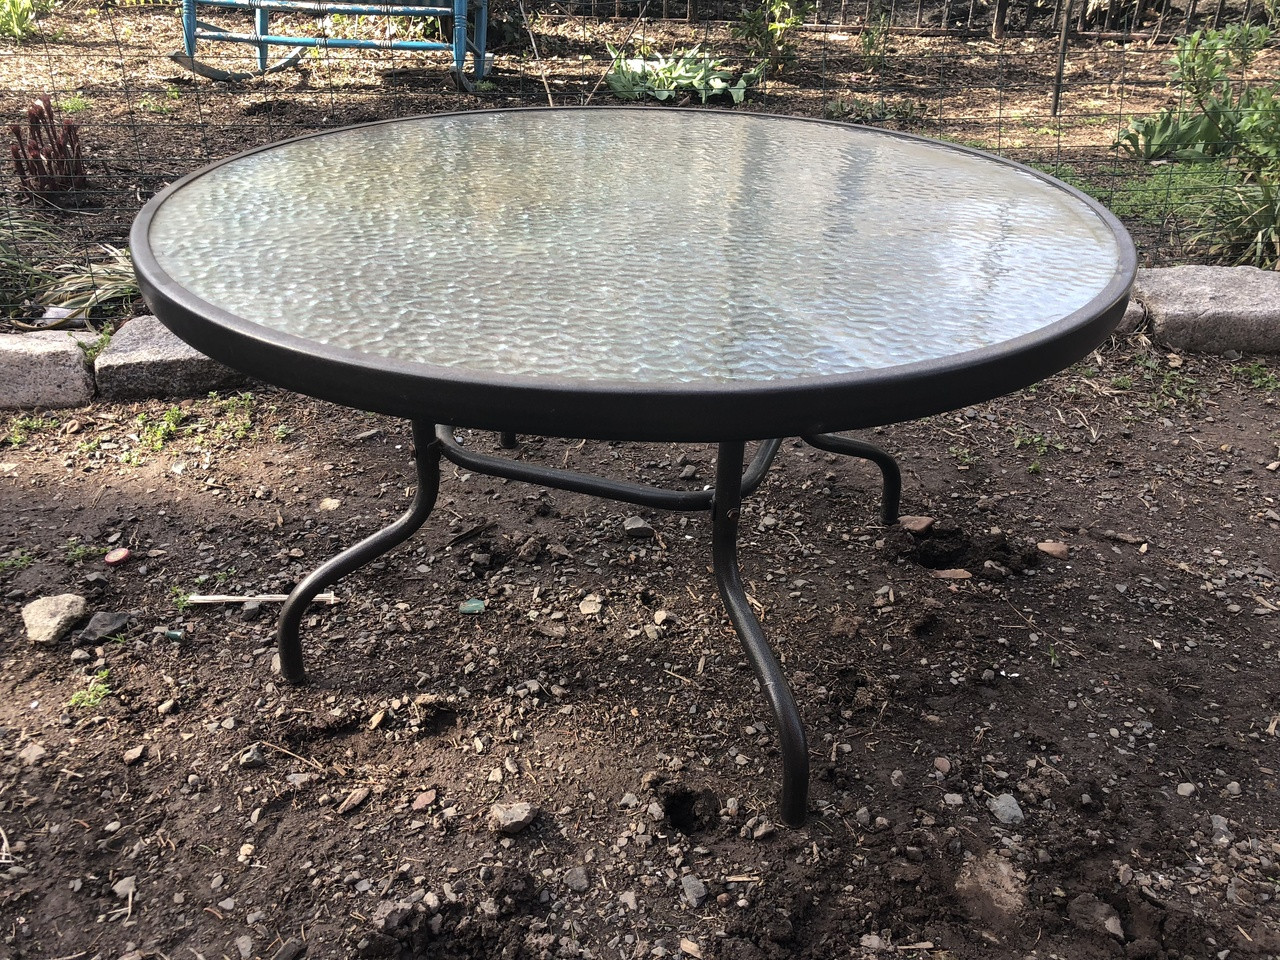 48" Round Glass Patio Table - Forgotten Furniture